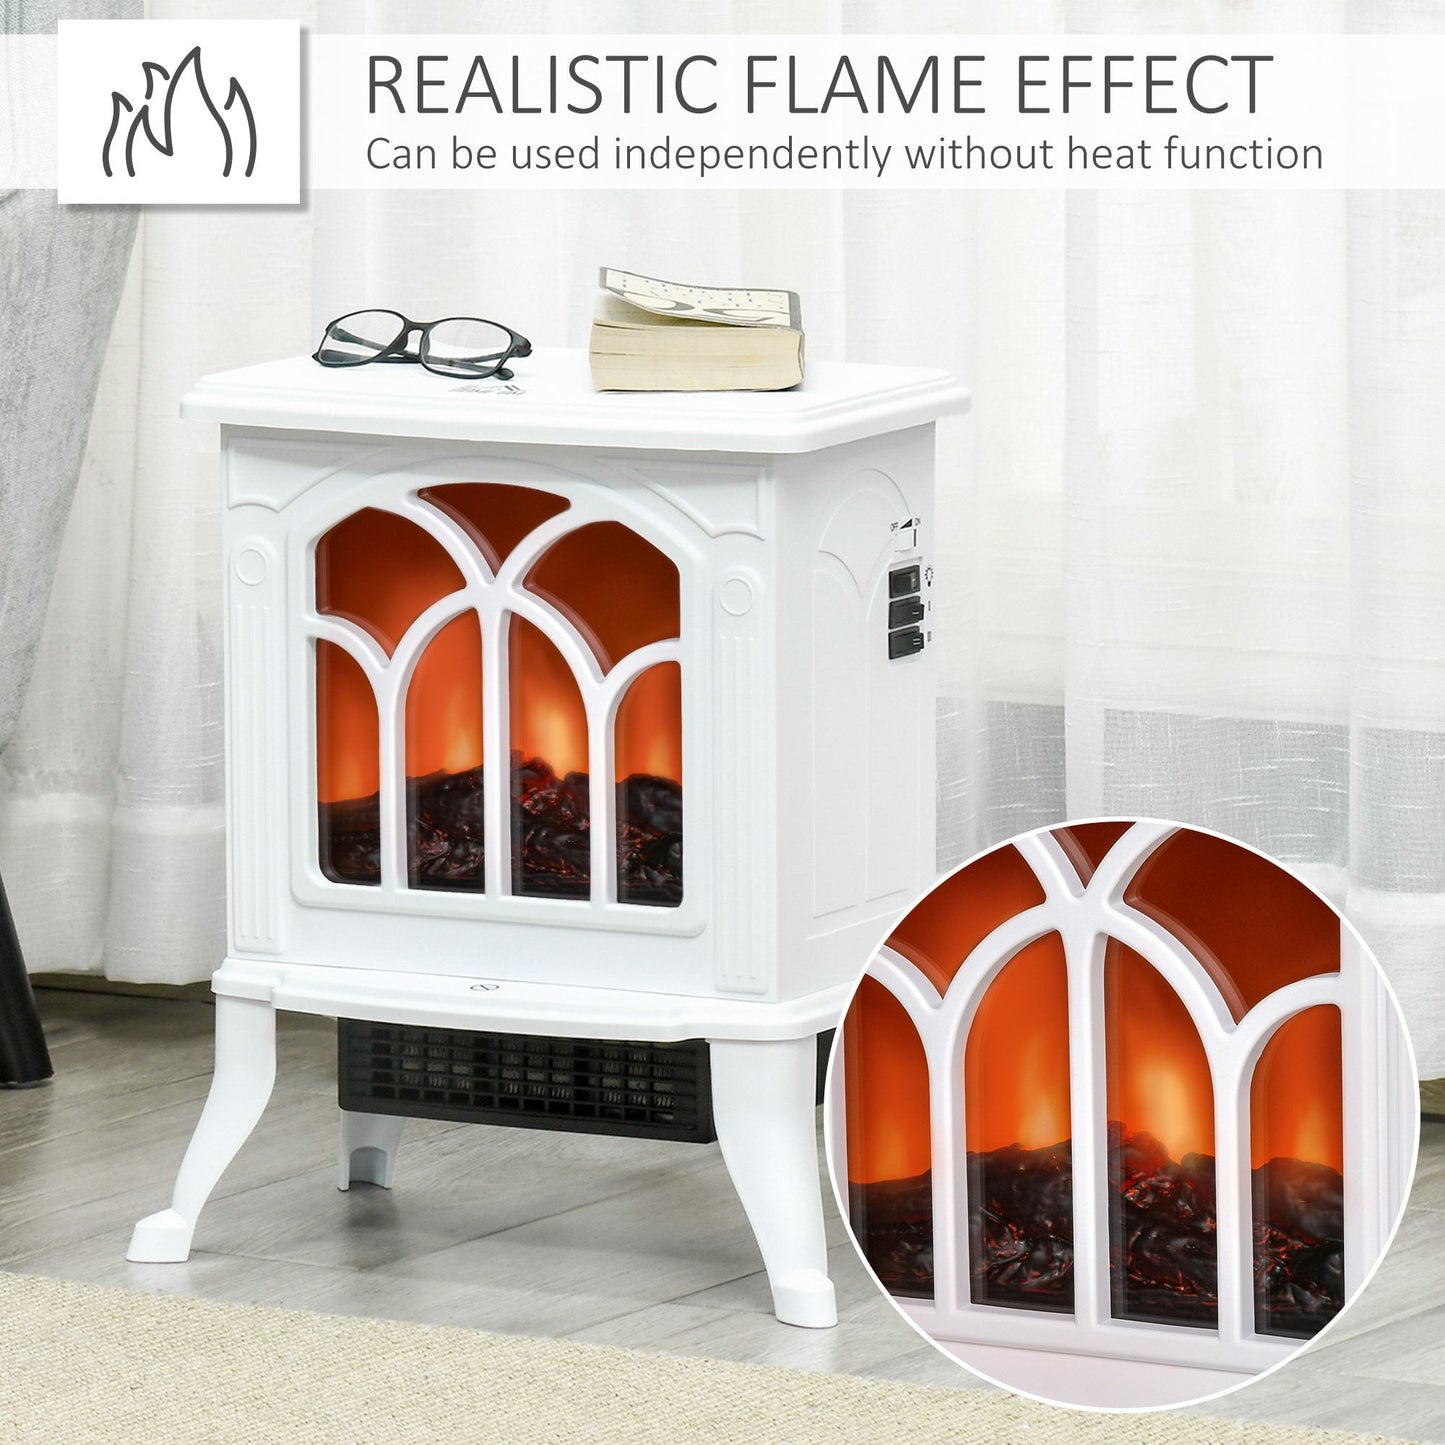 Miscellaneous-Free Standing Electric Fireplac, White Electric Fireplace with Flame Effect, Adjustable Temperature, Overheat Protection, 750W/1500W - Outdoor Style Company